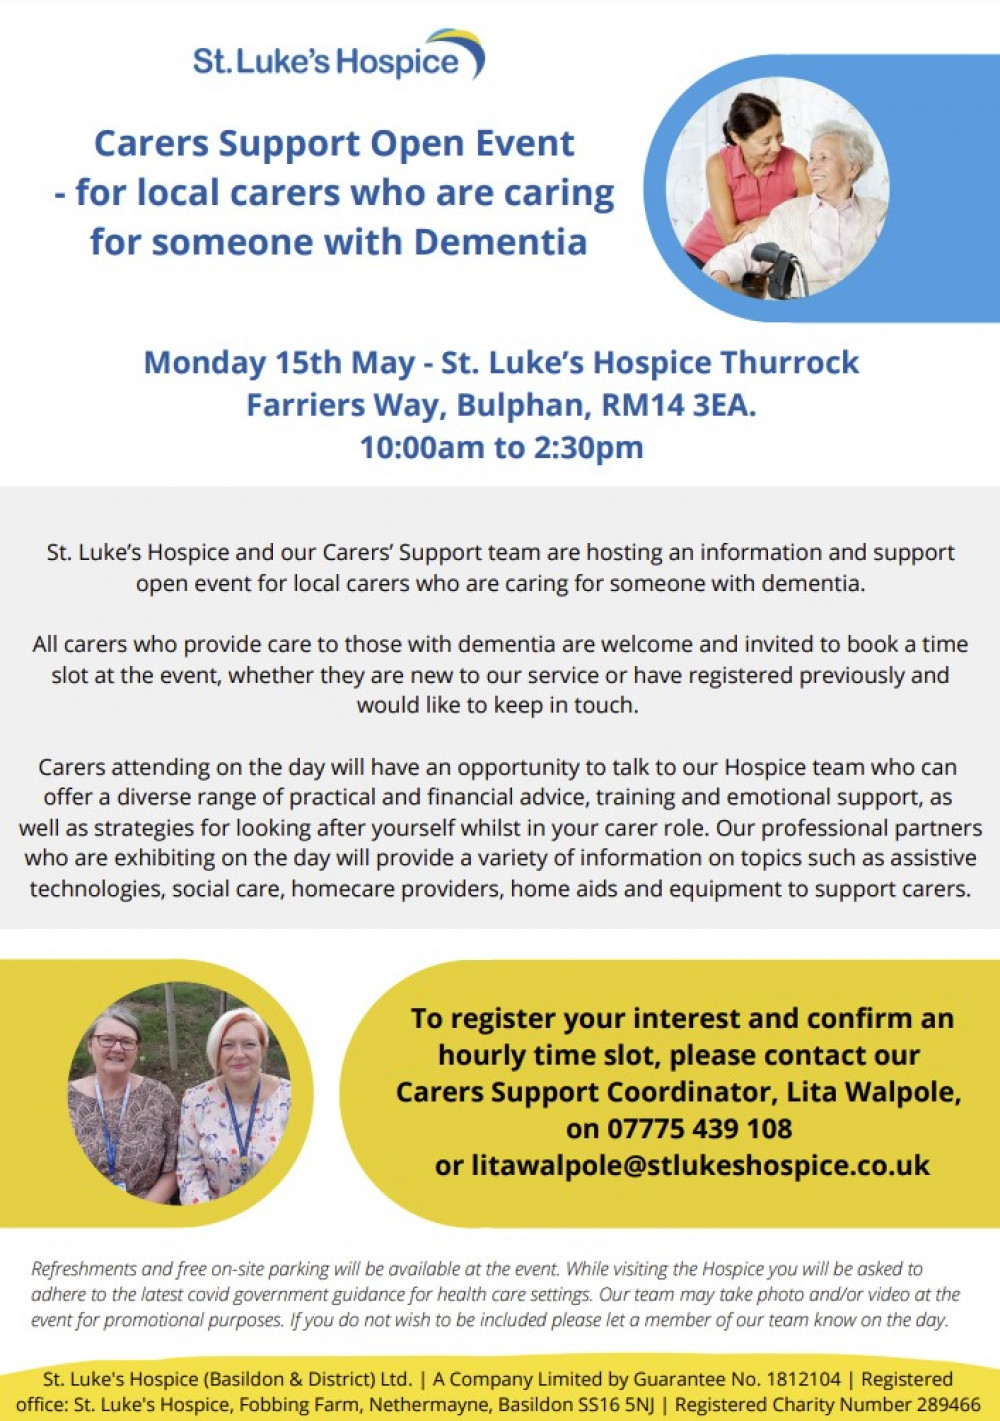 Carers' event at St Luke's Hospice, Thurrock. 